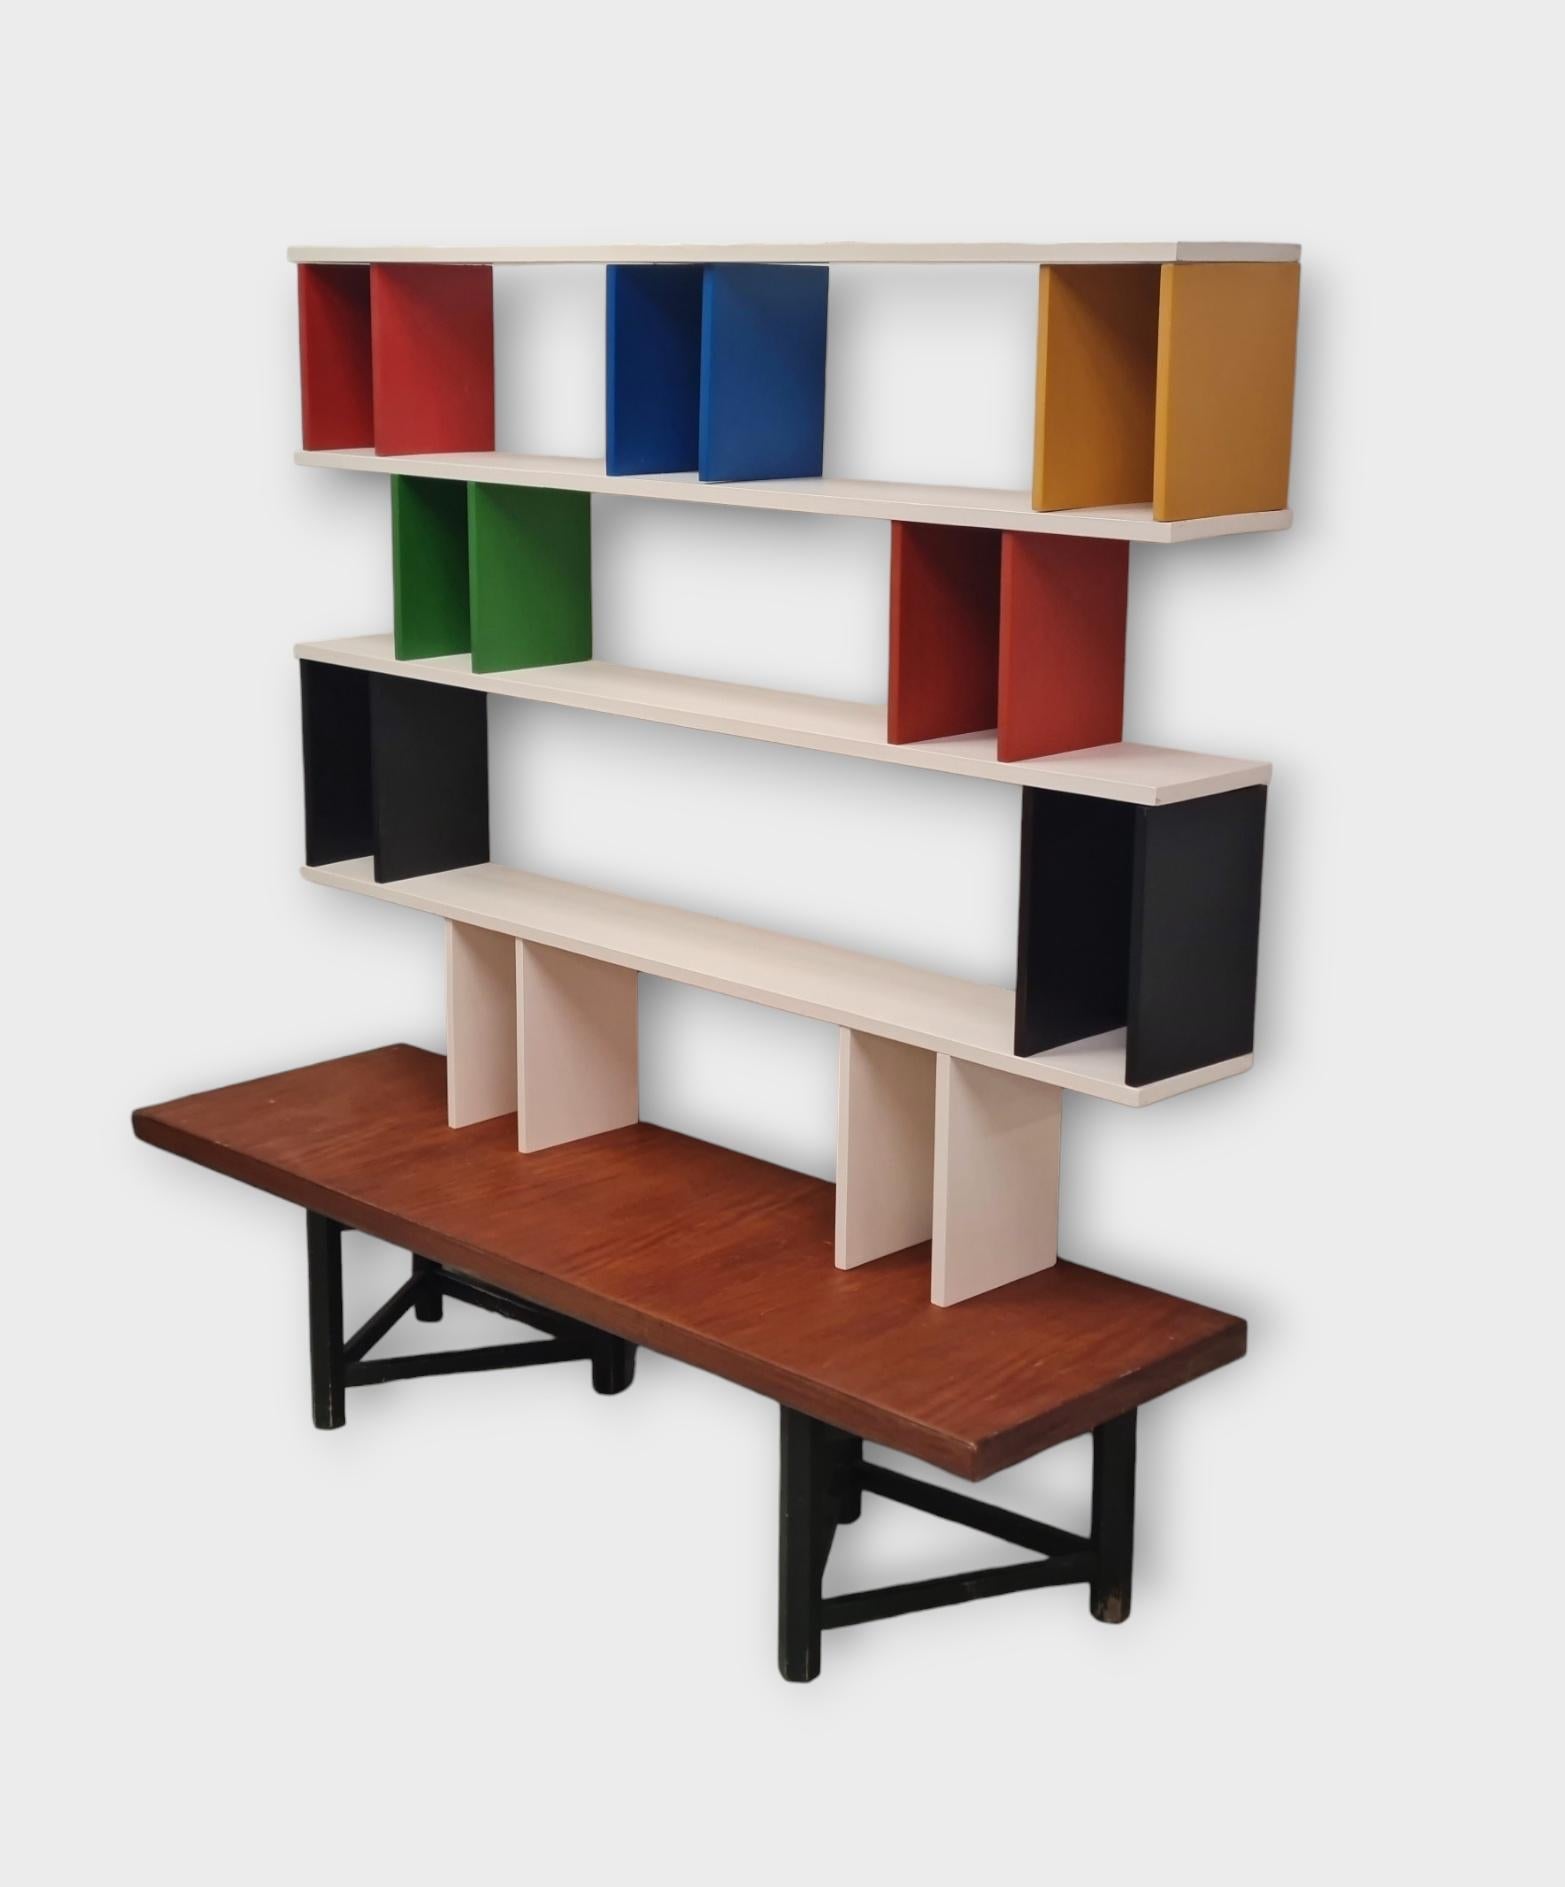 Hiort af Ornäs designed this type shelf in the 1950s. It is called the `Välipala hylly` in Finnish, and it has become a classic a long time ago. Actually, it has been taken again into production not so long ago. 

This is a very simple, practical